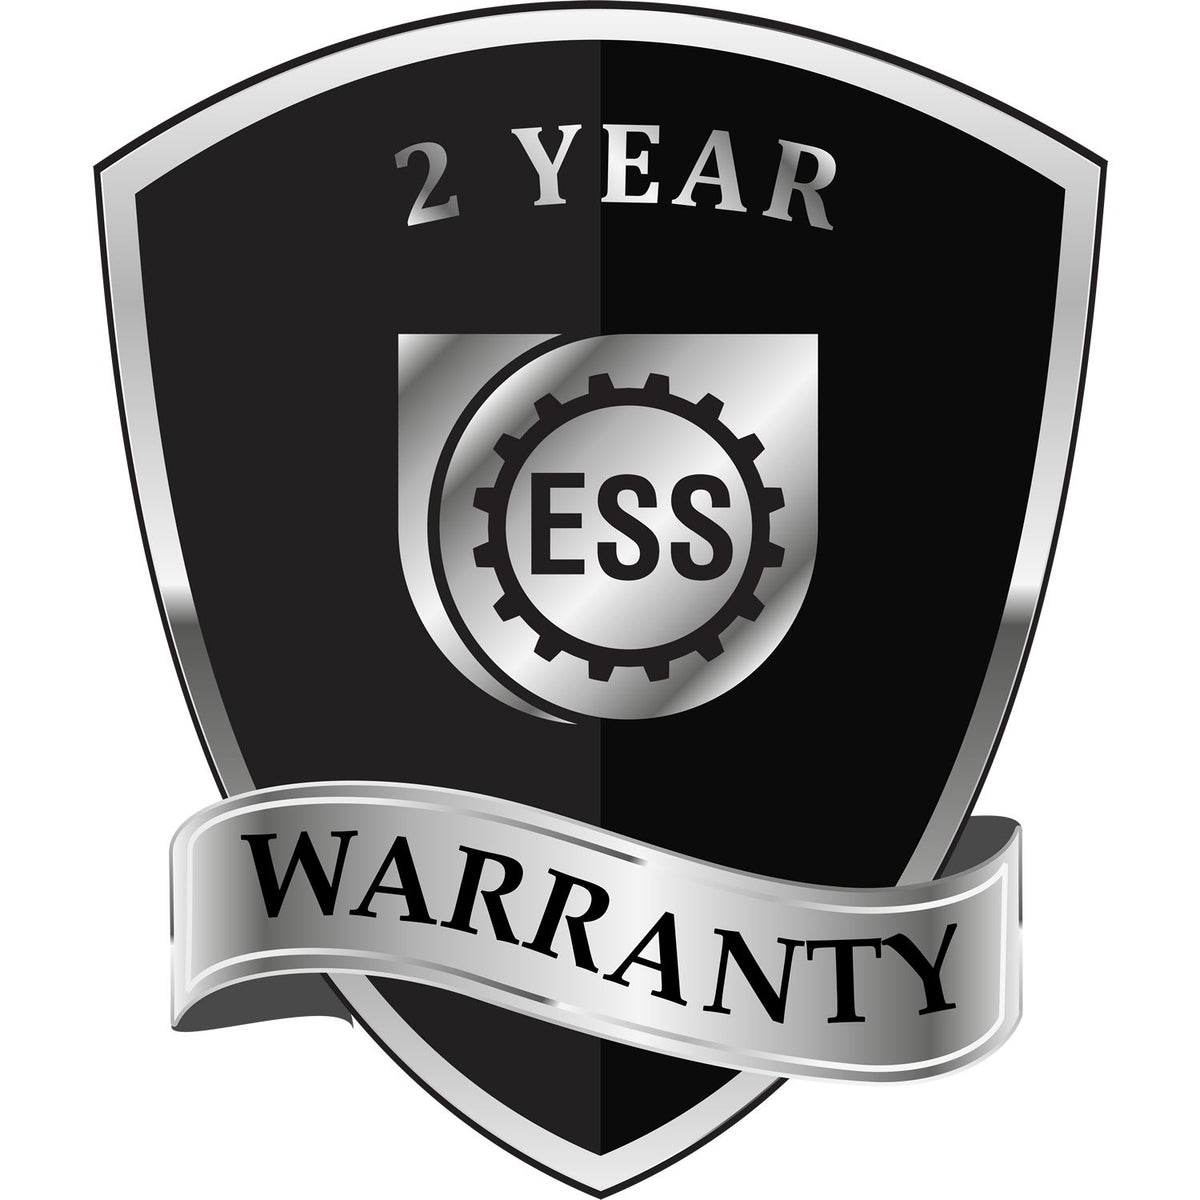 A black and silver badge or emblem showing warranty information for the Gift Massachusetts Geologist Seal